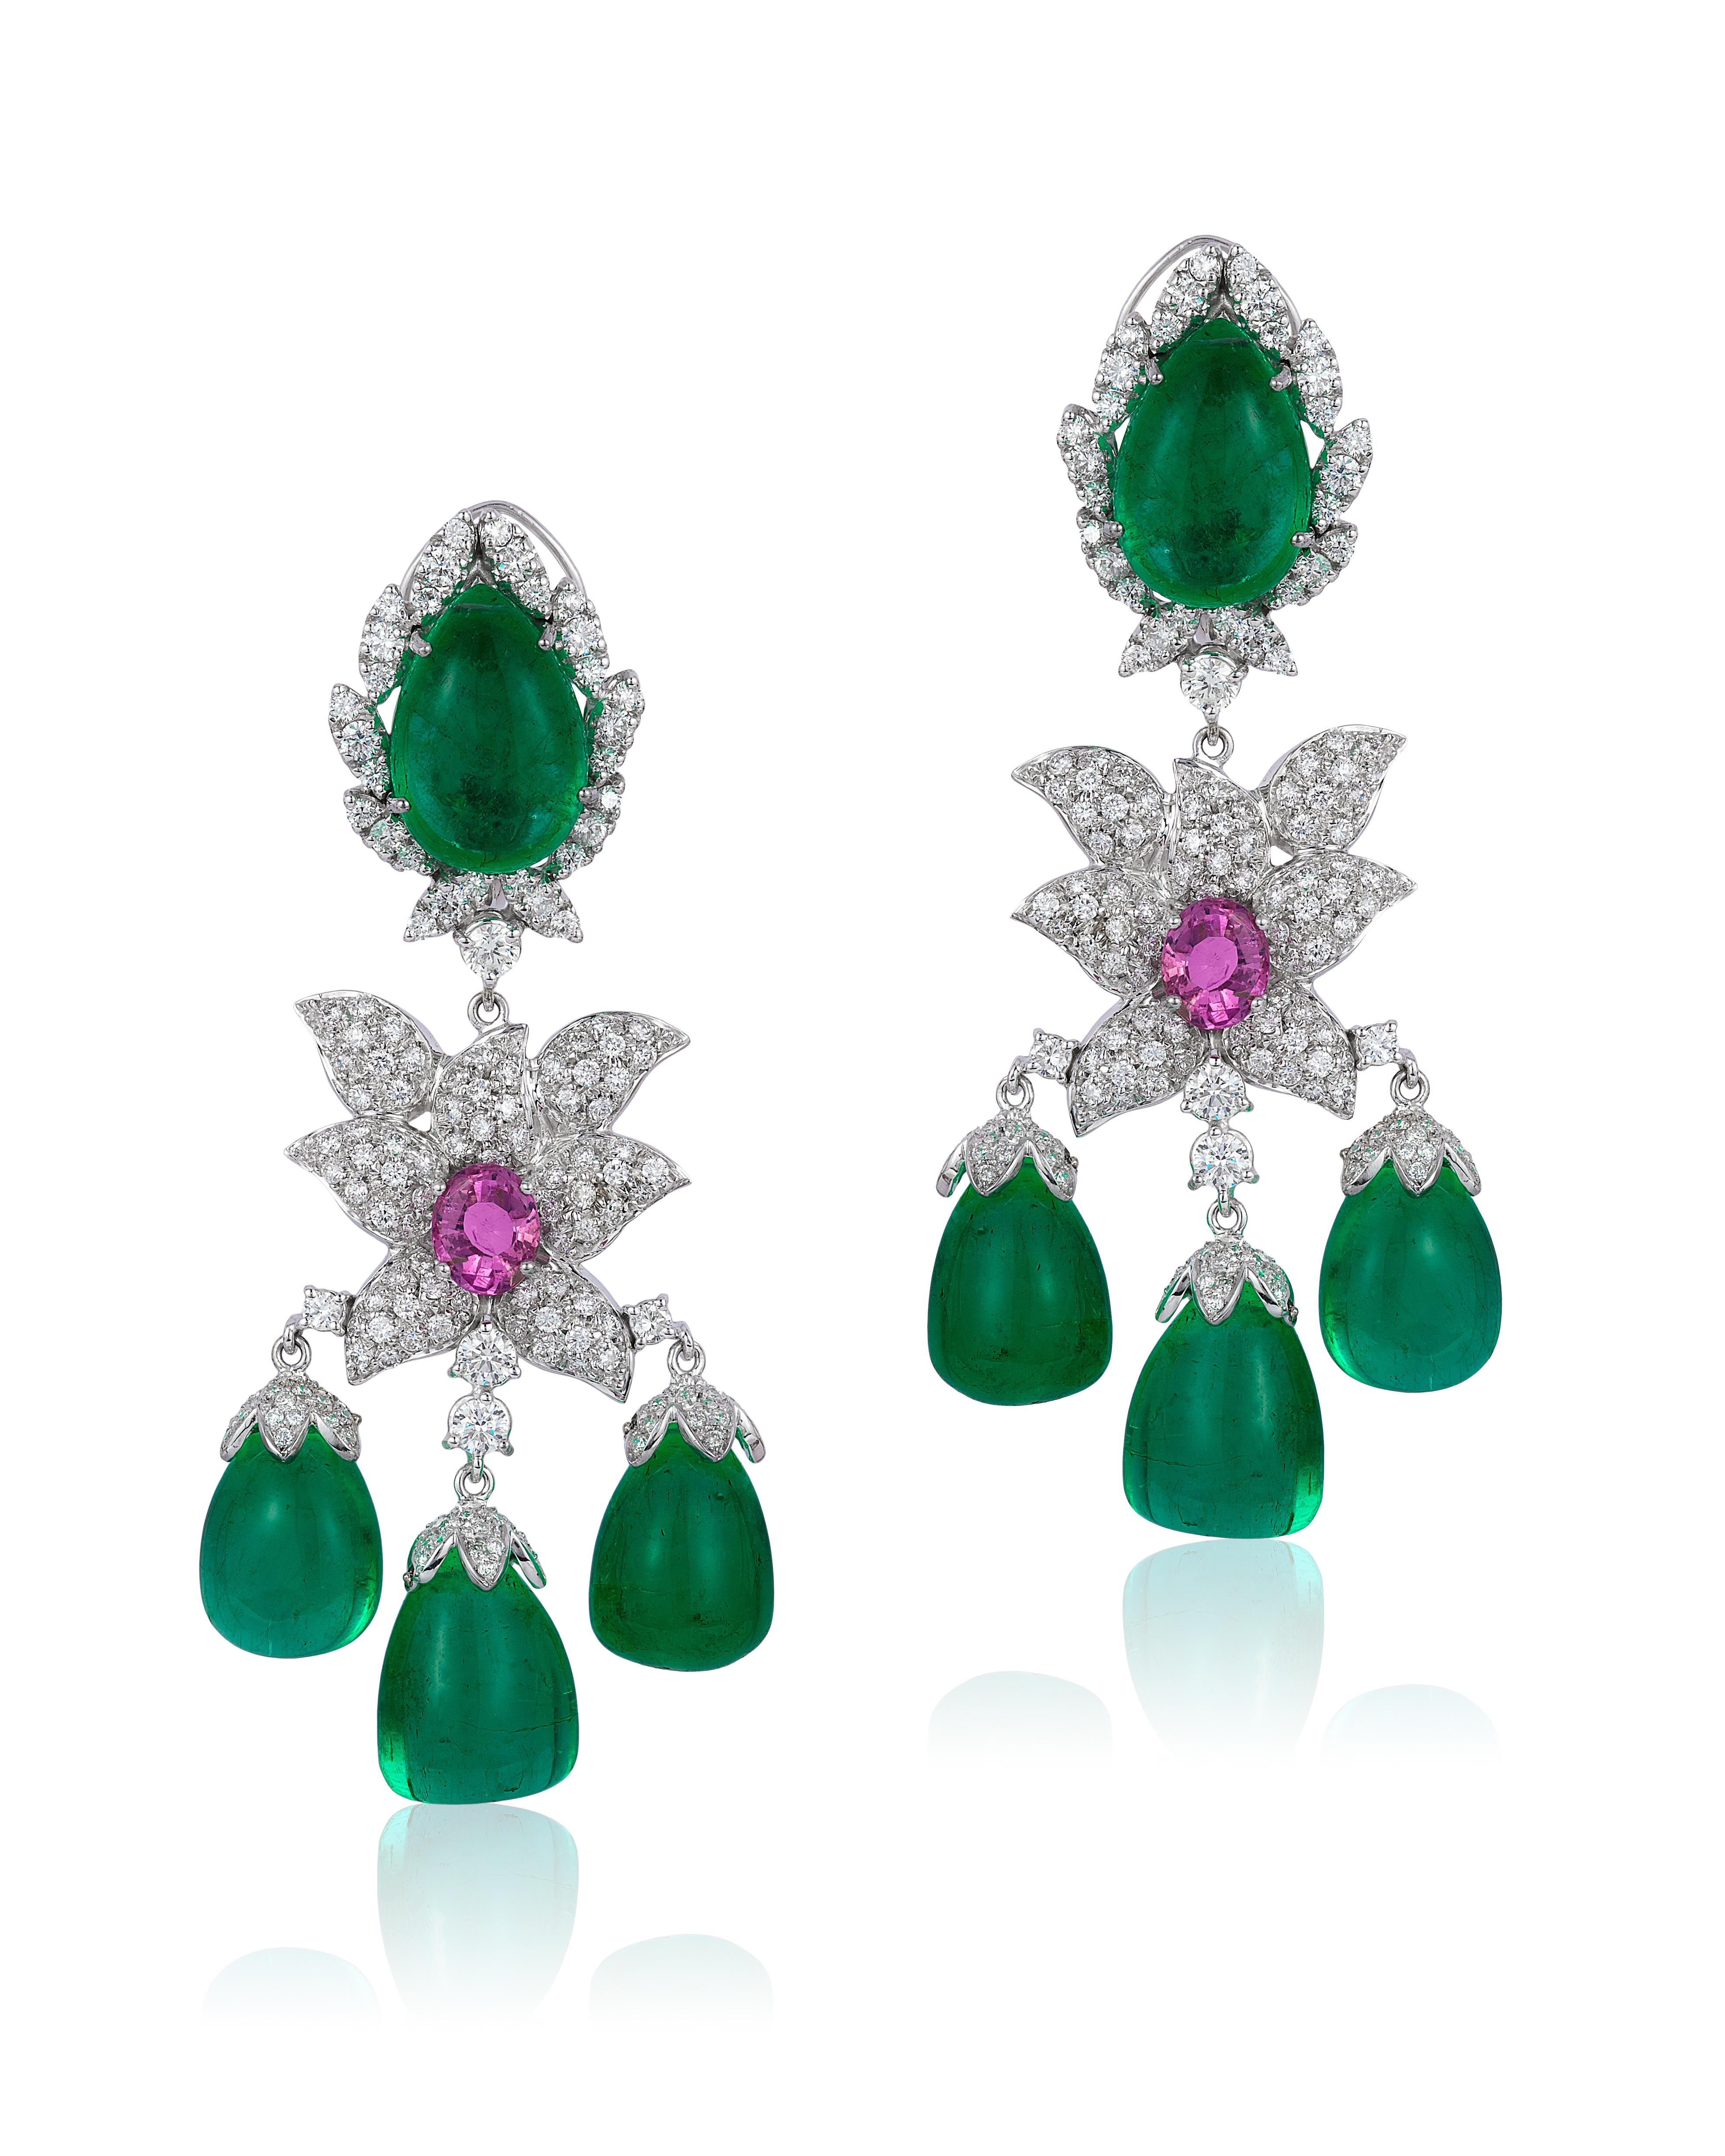 Andreoli Colombian Emerald Drop Pink Sapphire Diamond Chandelier Earrings 18K. These earrings feature 79.13 carats of colombian emerald cabochon drops surrounded with 5.39 carat of F-G-H Color VS-SI Clarity round brilliant diamonds. Two center pink